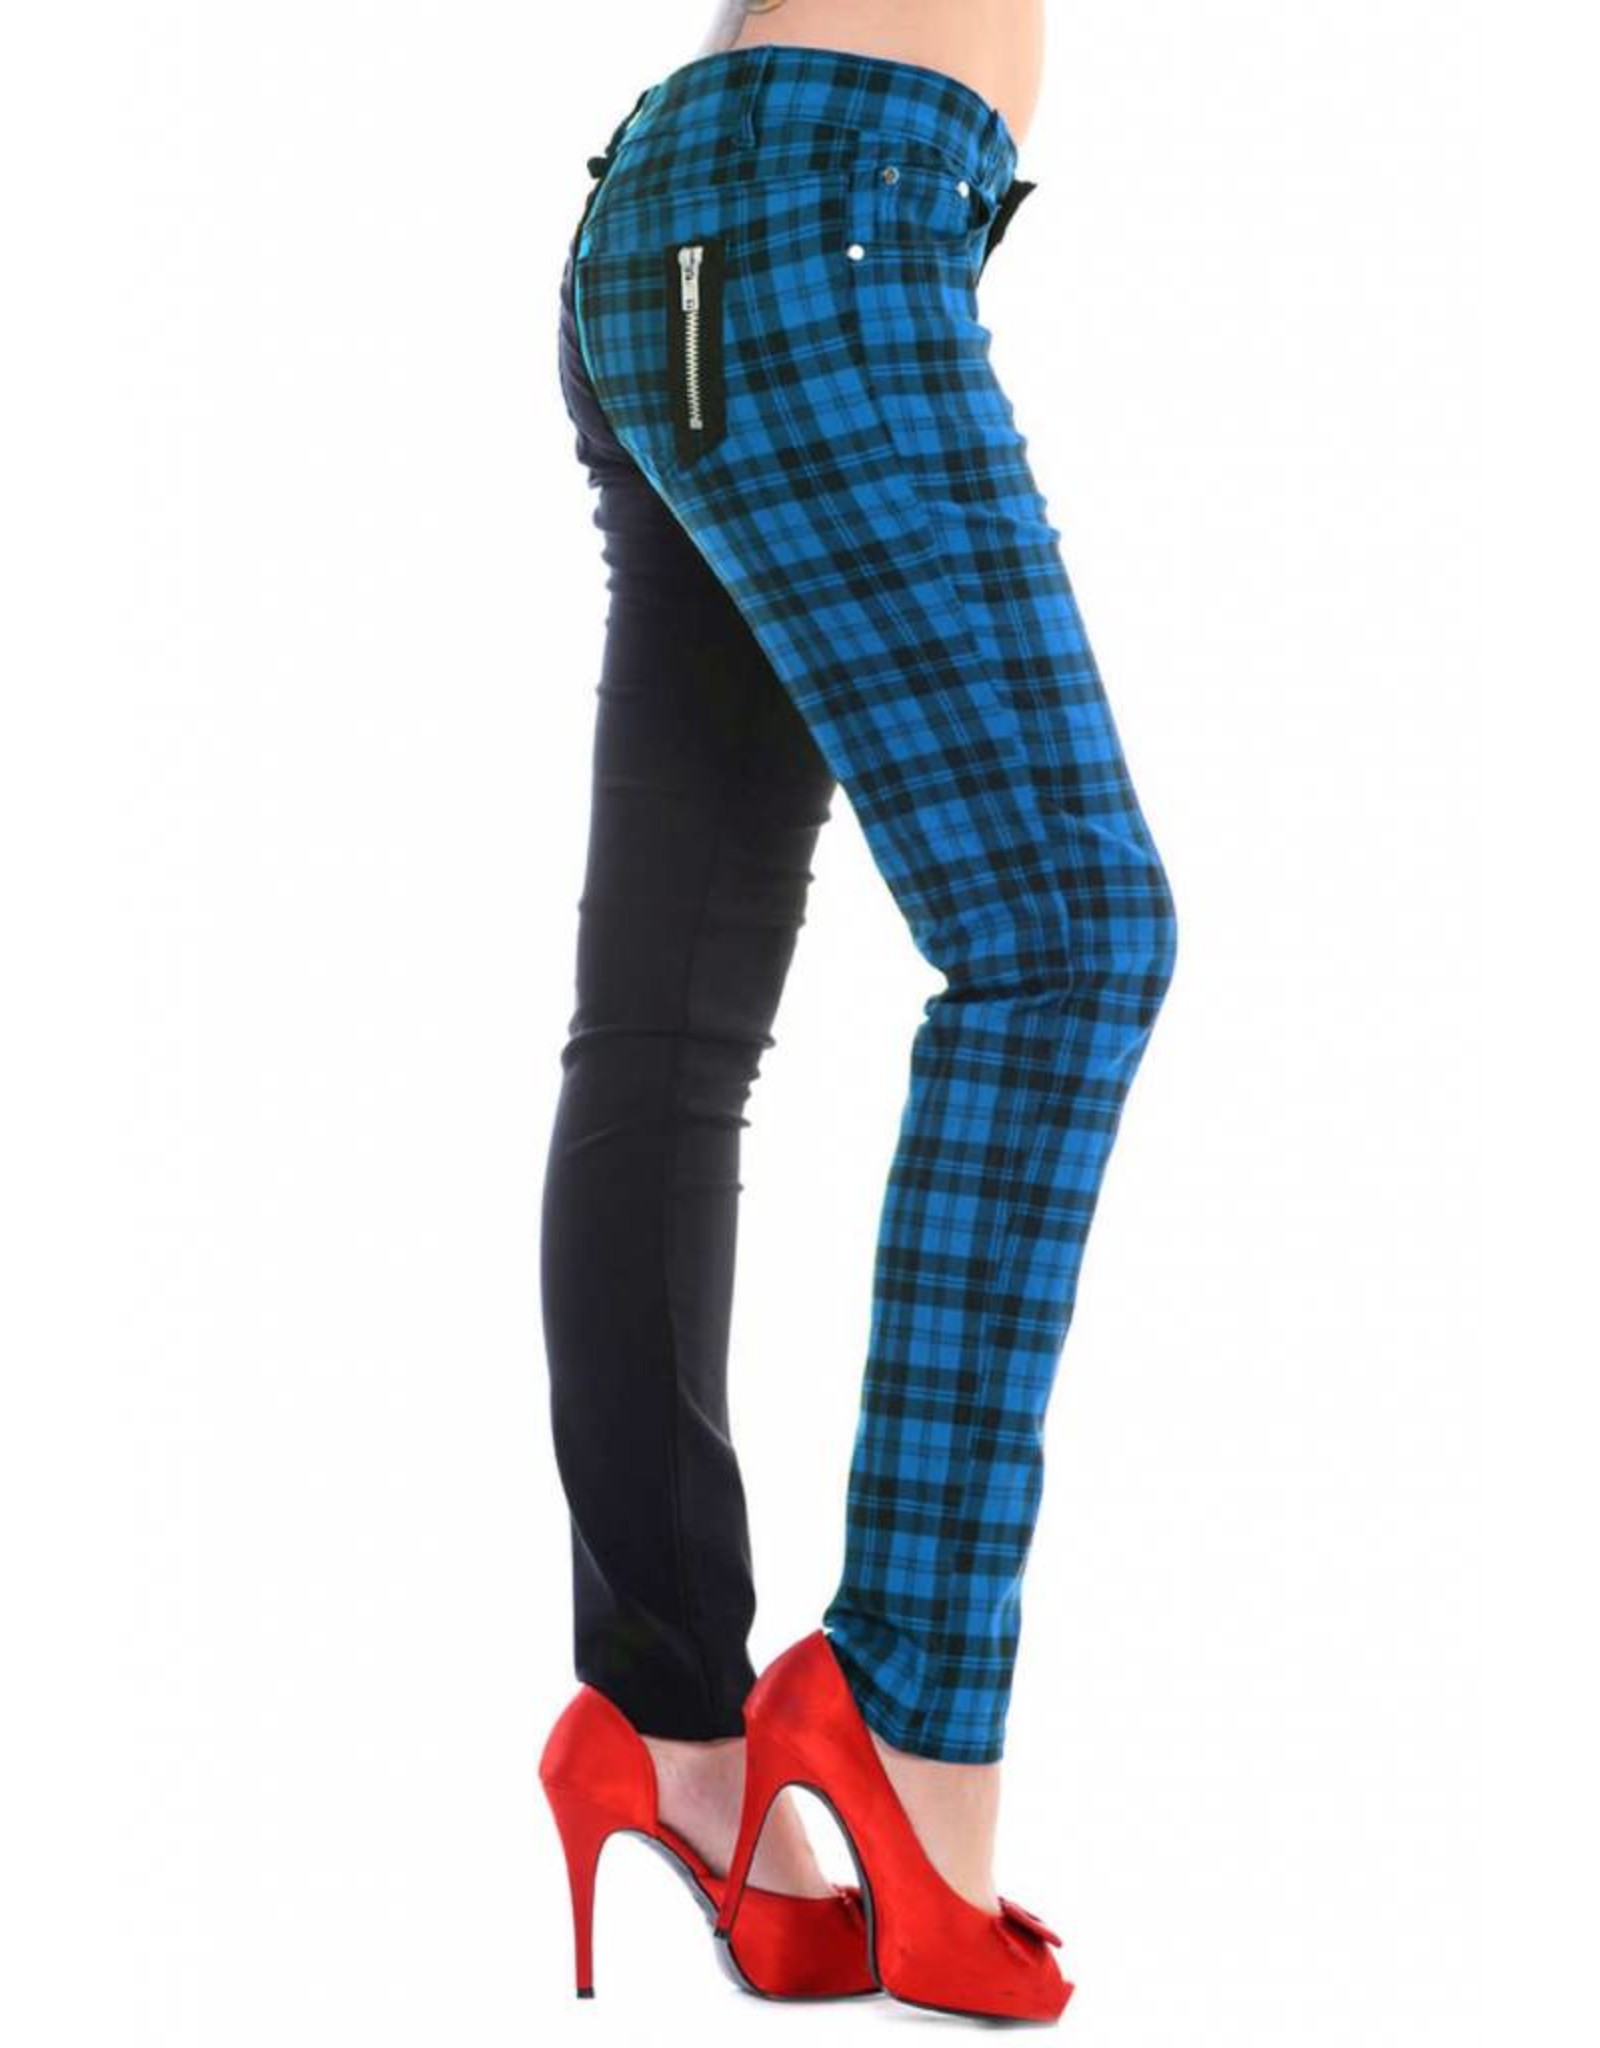 BANNED - Half Checkered Blue Pants